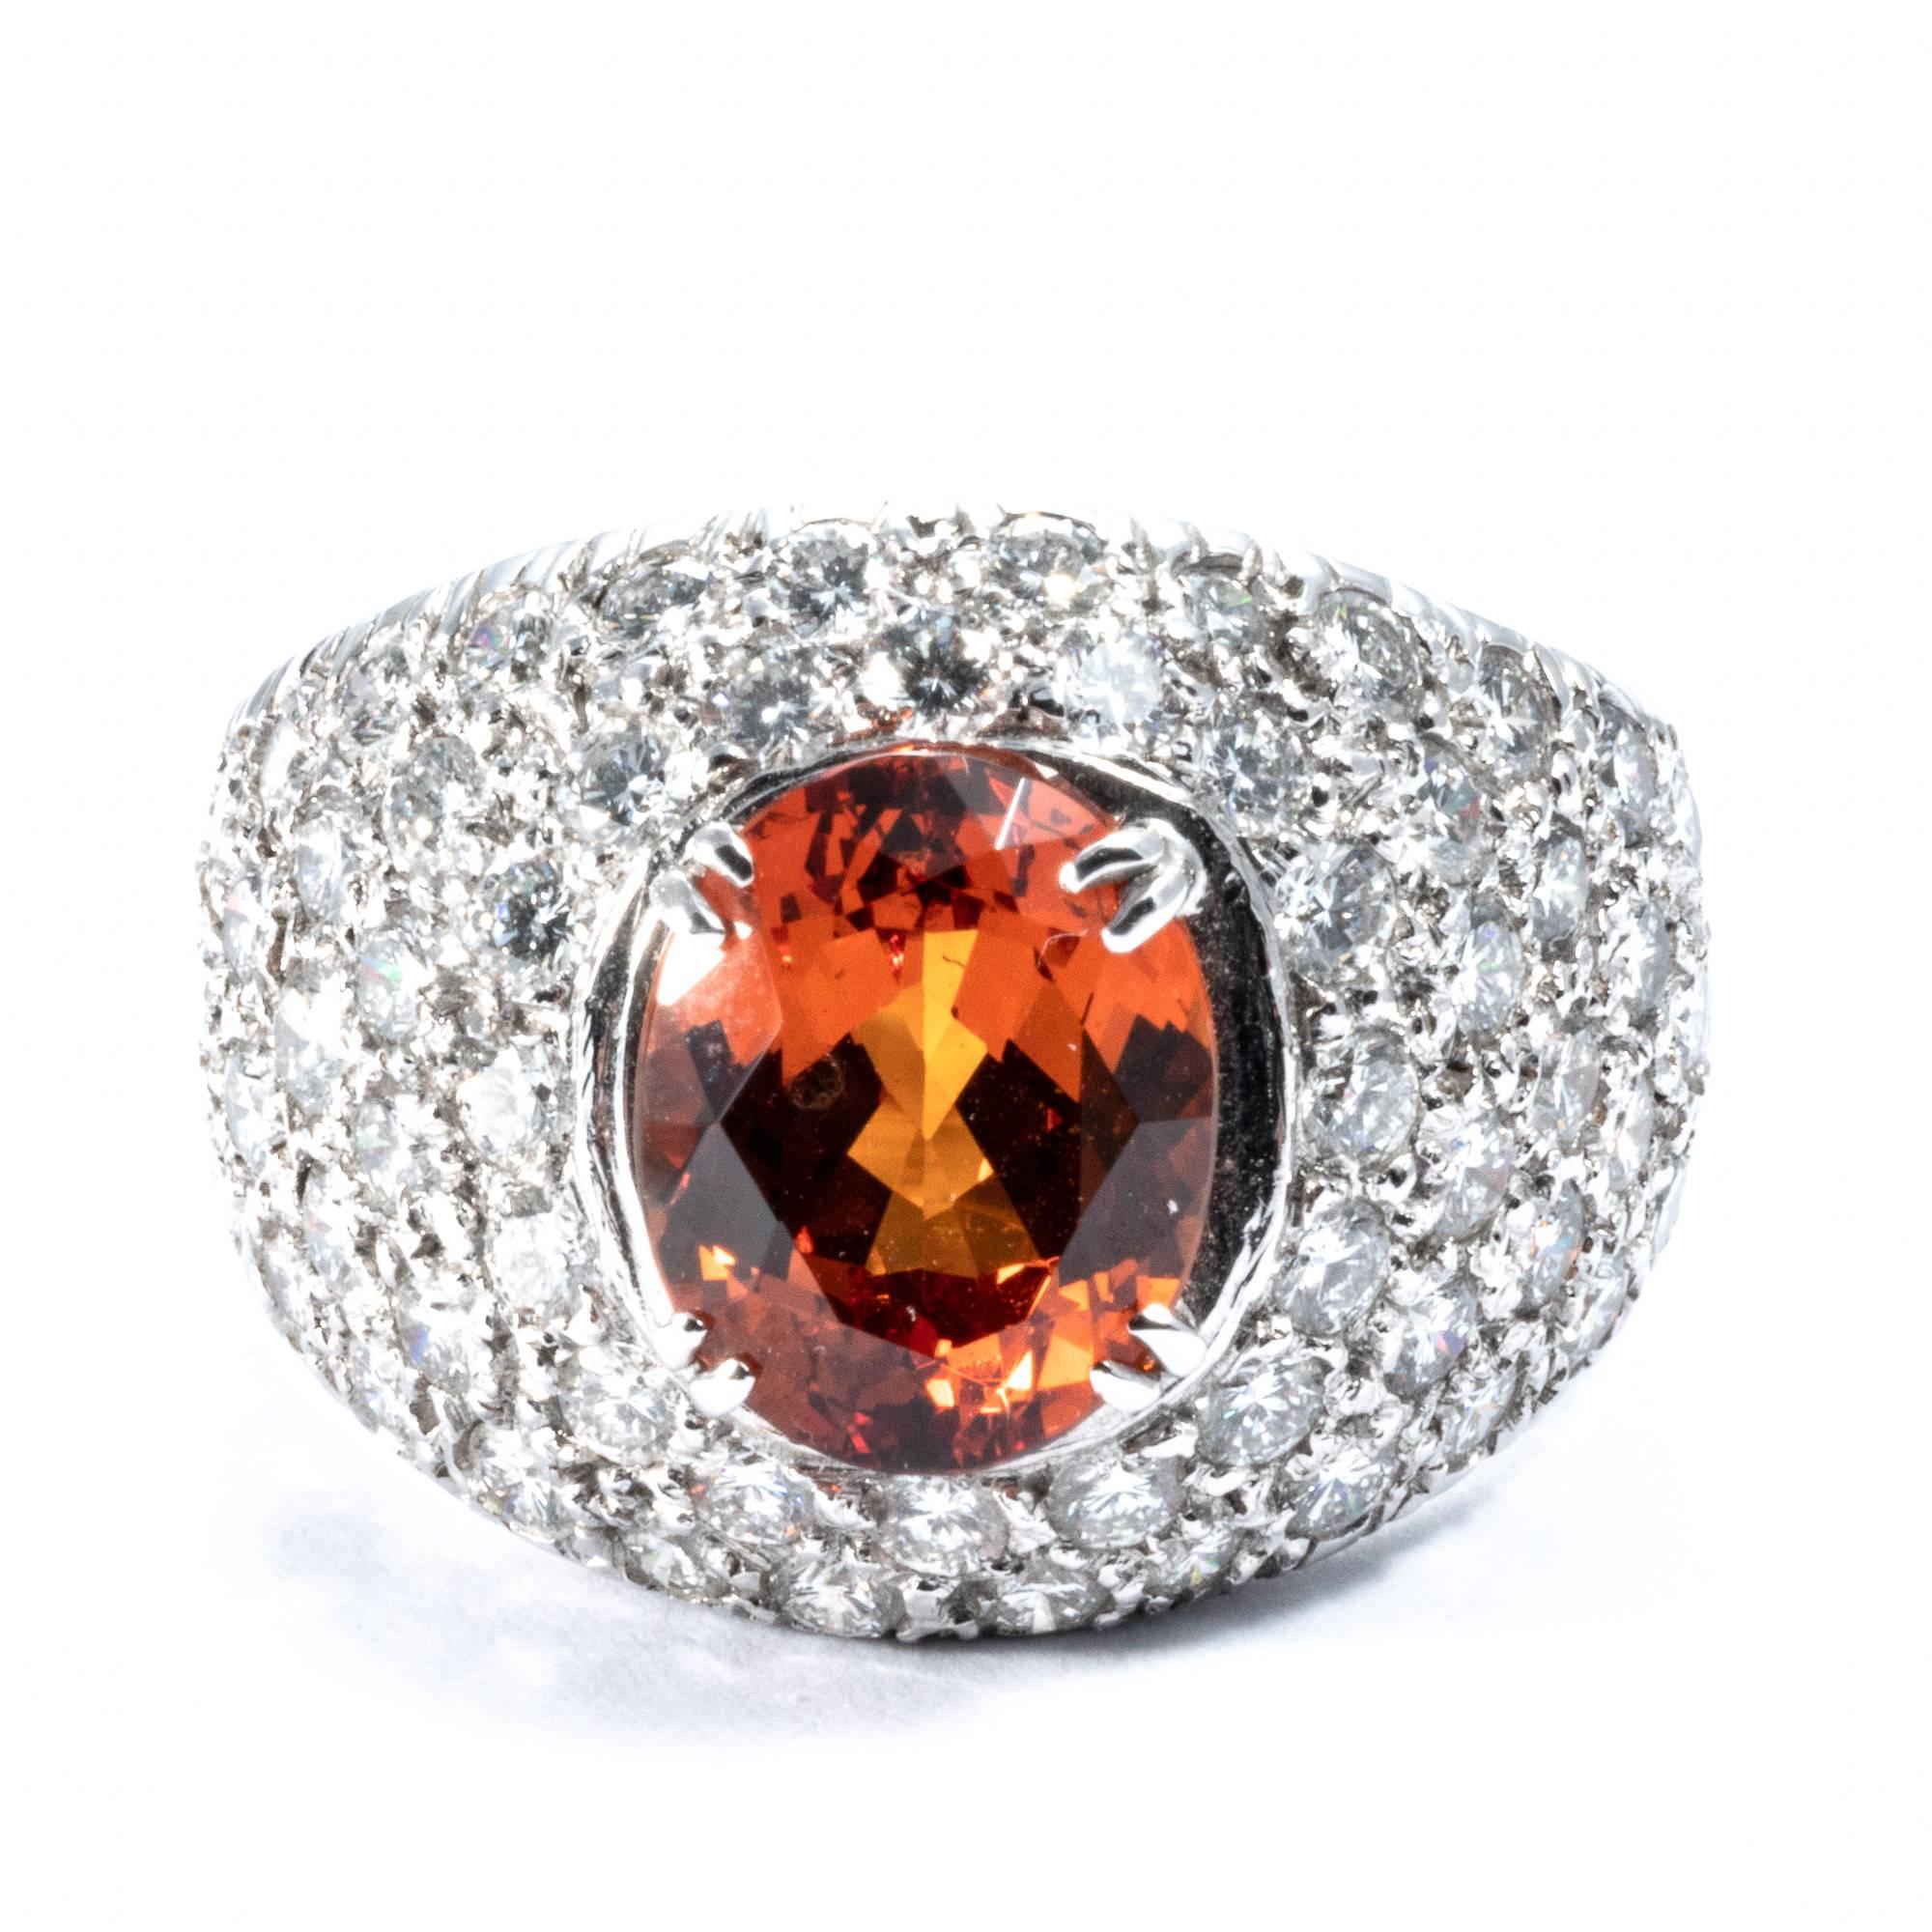 This wide ring band is accurately shaped.  Nice and  slender, this cocktail ring has will dress up your hand. Fully studded with 60 extra-white diamonds, it features a rare vivid mandarin garnet of 3.51 carats that will turn everybody's head. Also